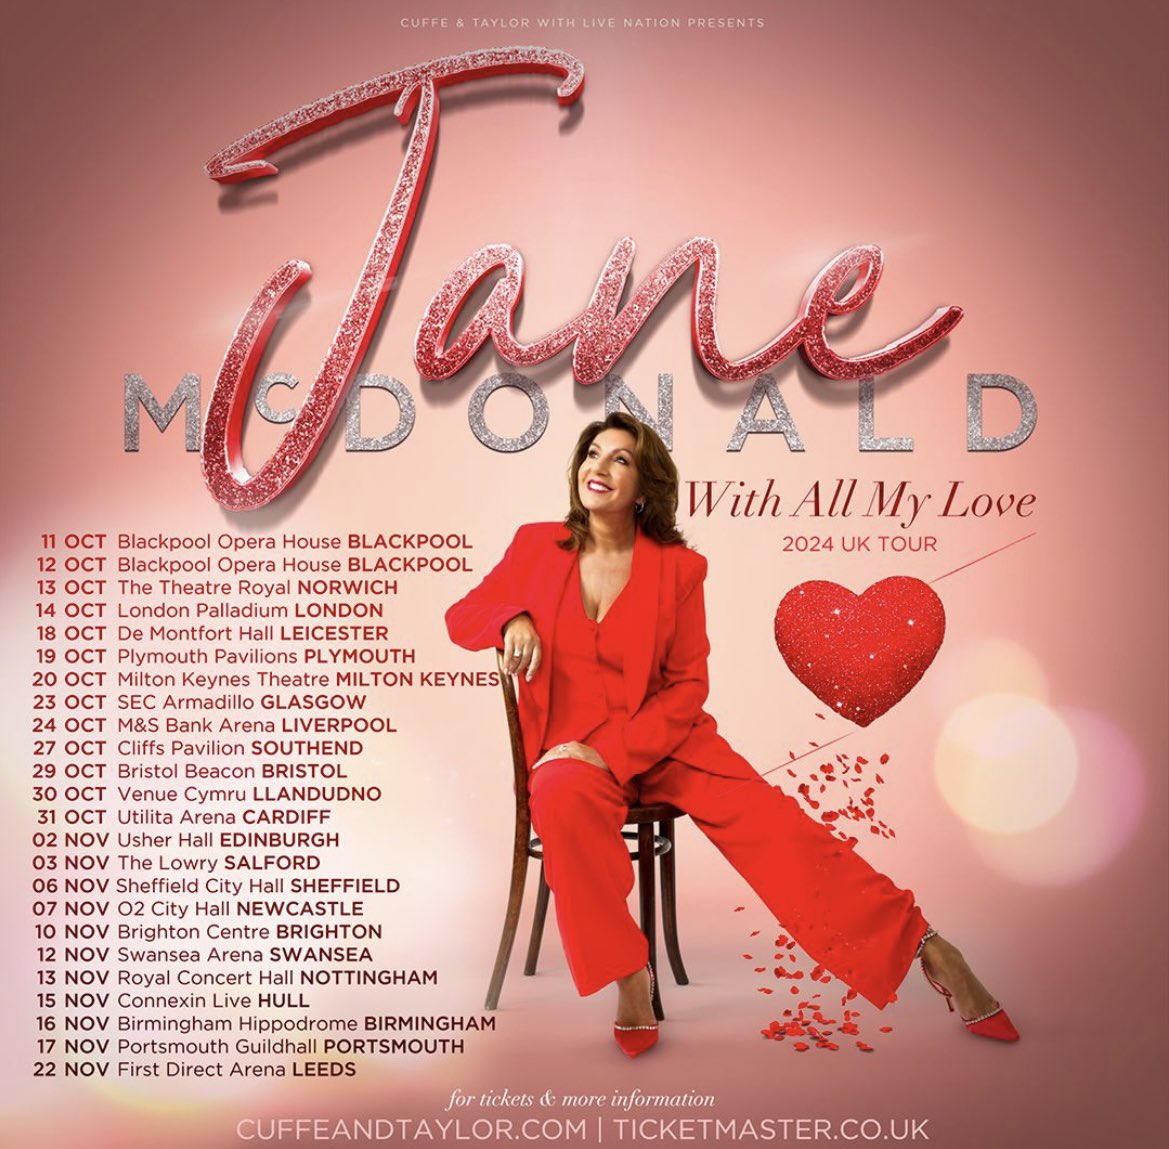 I'm so excited to be back on tour next year - I can't wait to see you all! Tickets for my 'With All My Love' tour will be available to book from 8.30am on Friday 24th Nov from Ticketmaster & direct from venues. For more details visit jane-mcdonald.com/tour-2024 @CuffeandTaylor